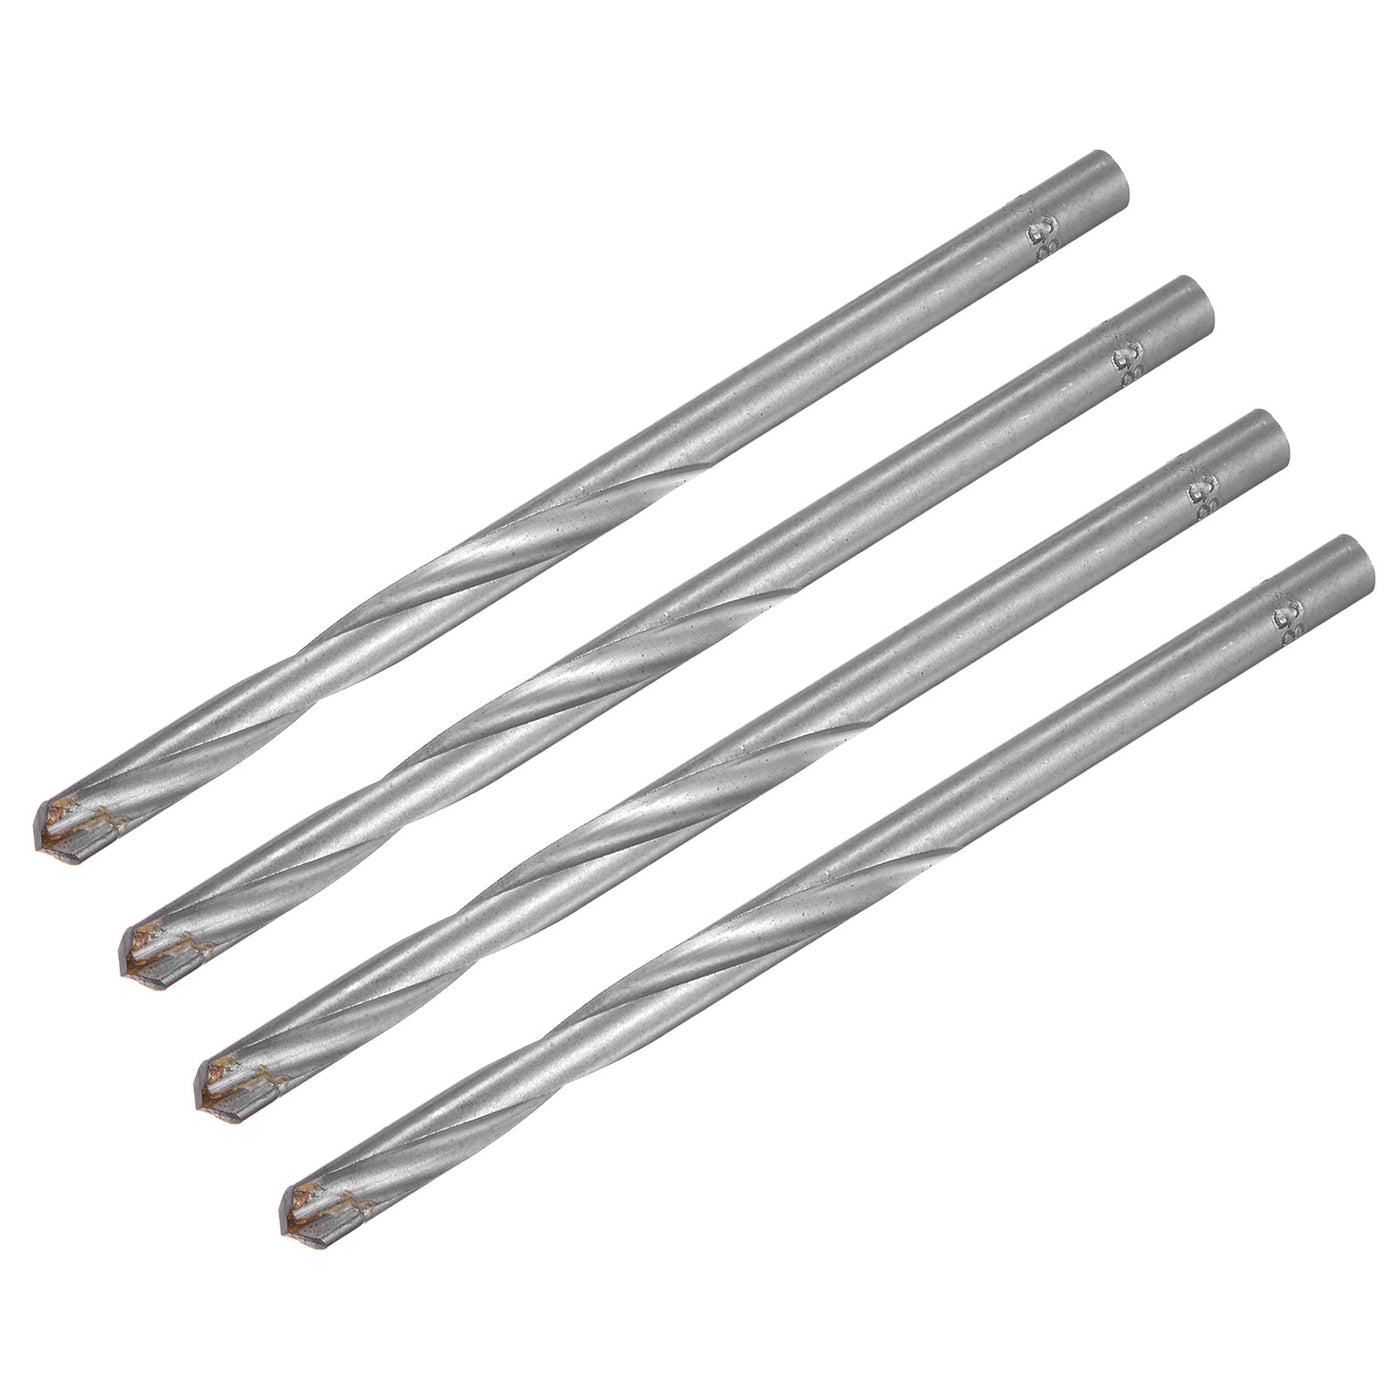 uxcell Uxcell 7mm Cutting Dia Round Shank Cemented Carbide Twist Drill Bit, 130mm Length 4 Pcs